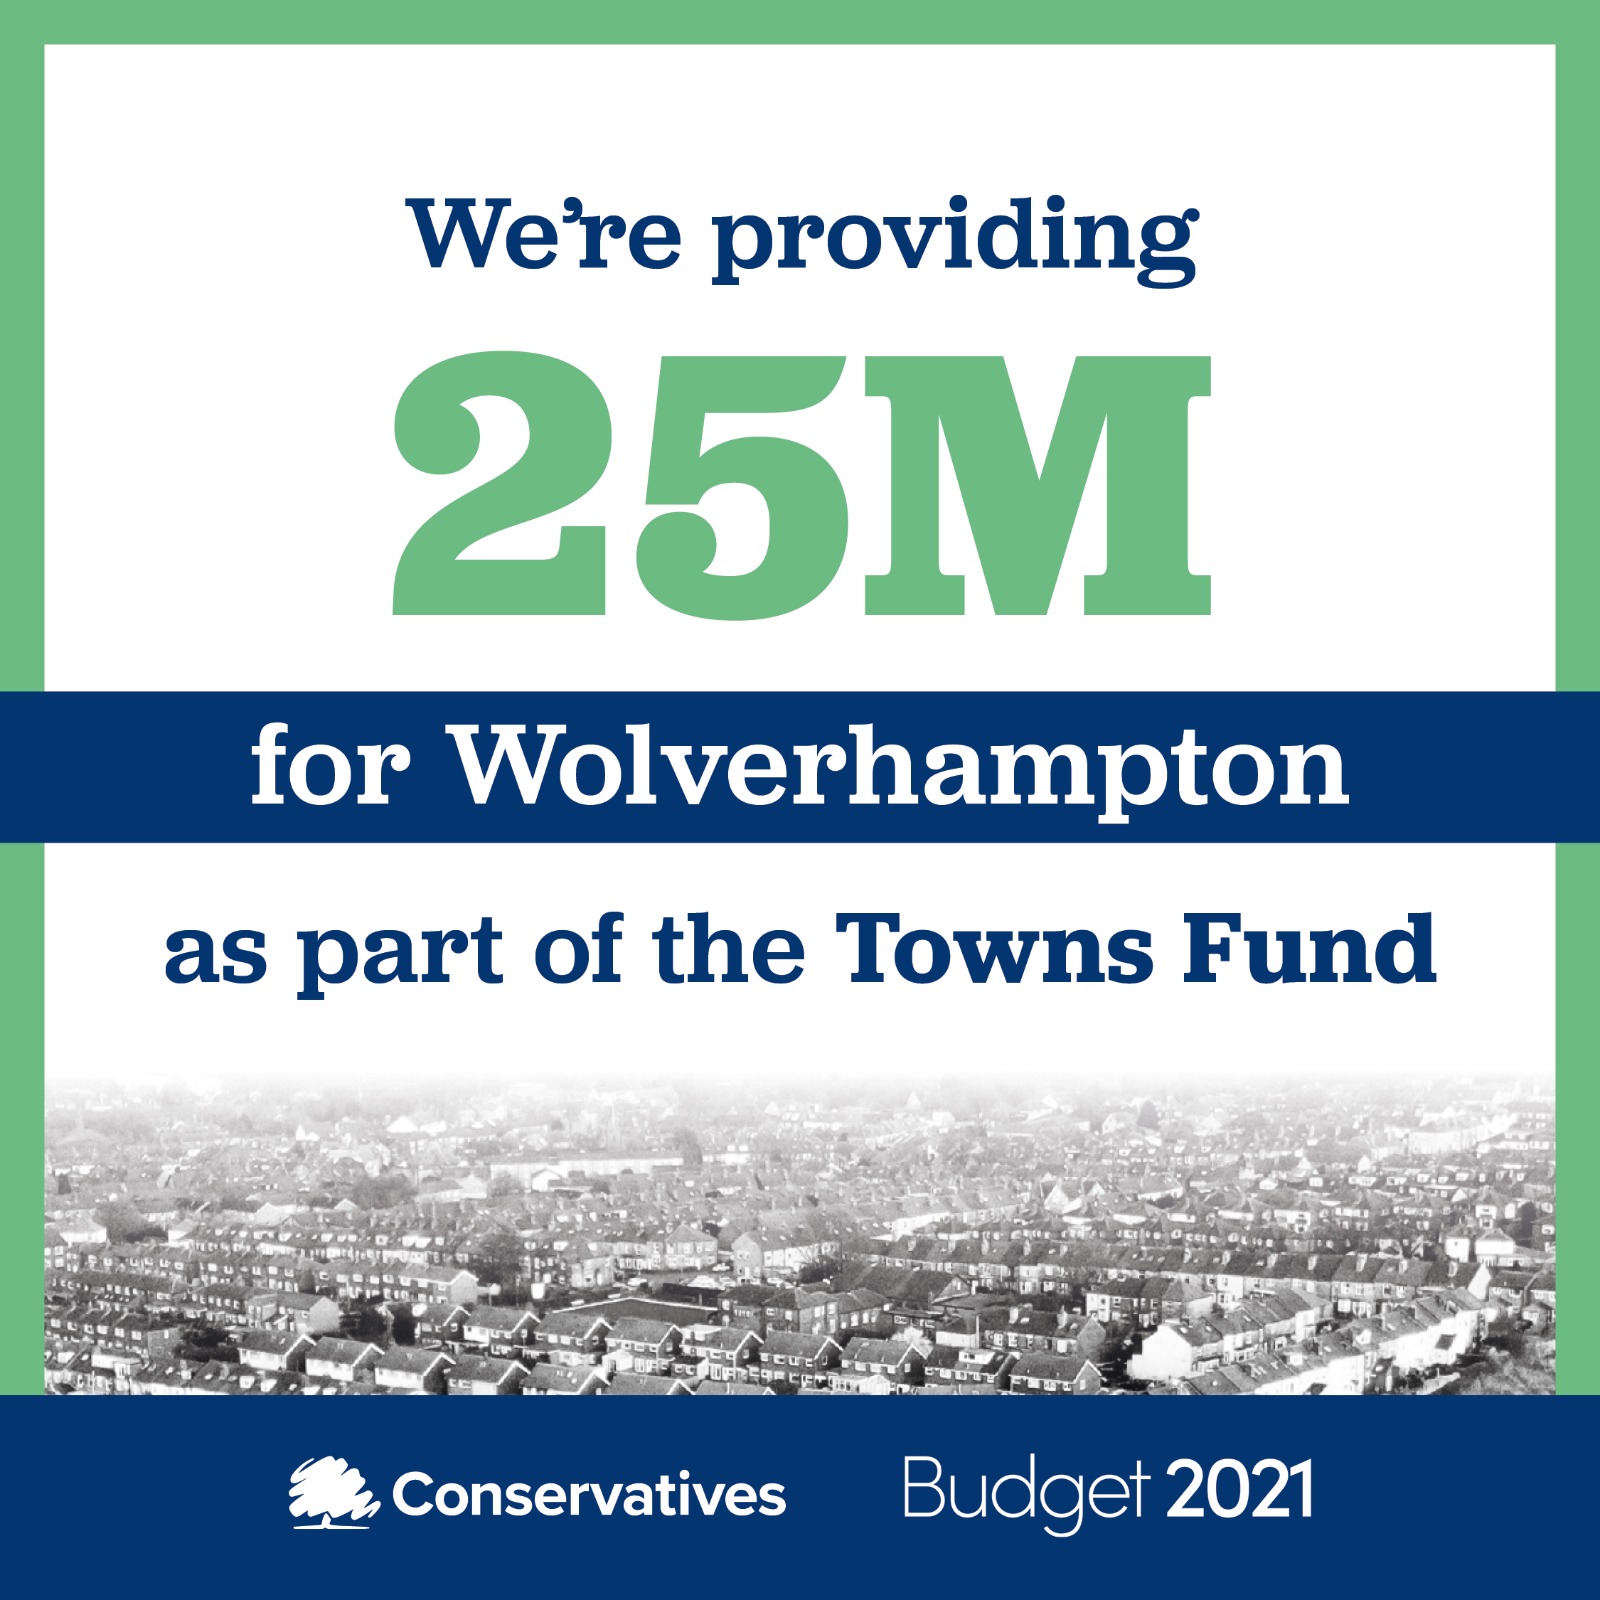 Towns Fund £25 million investment for Wolverhampton